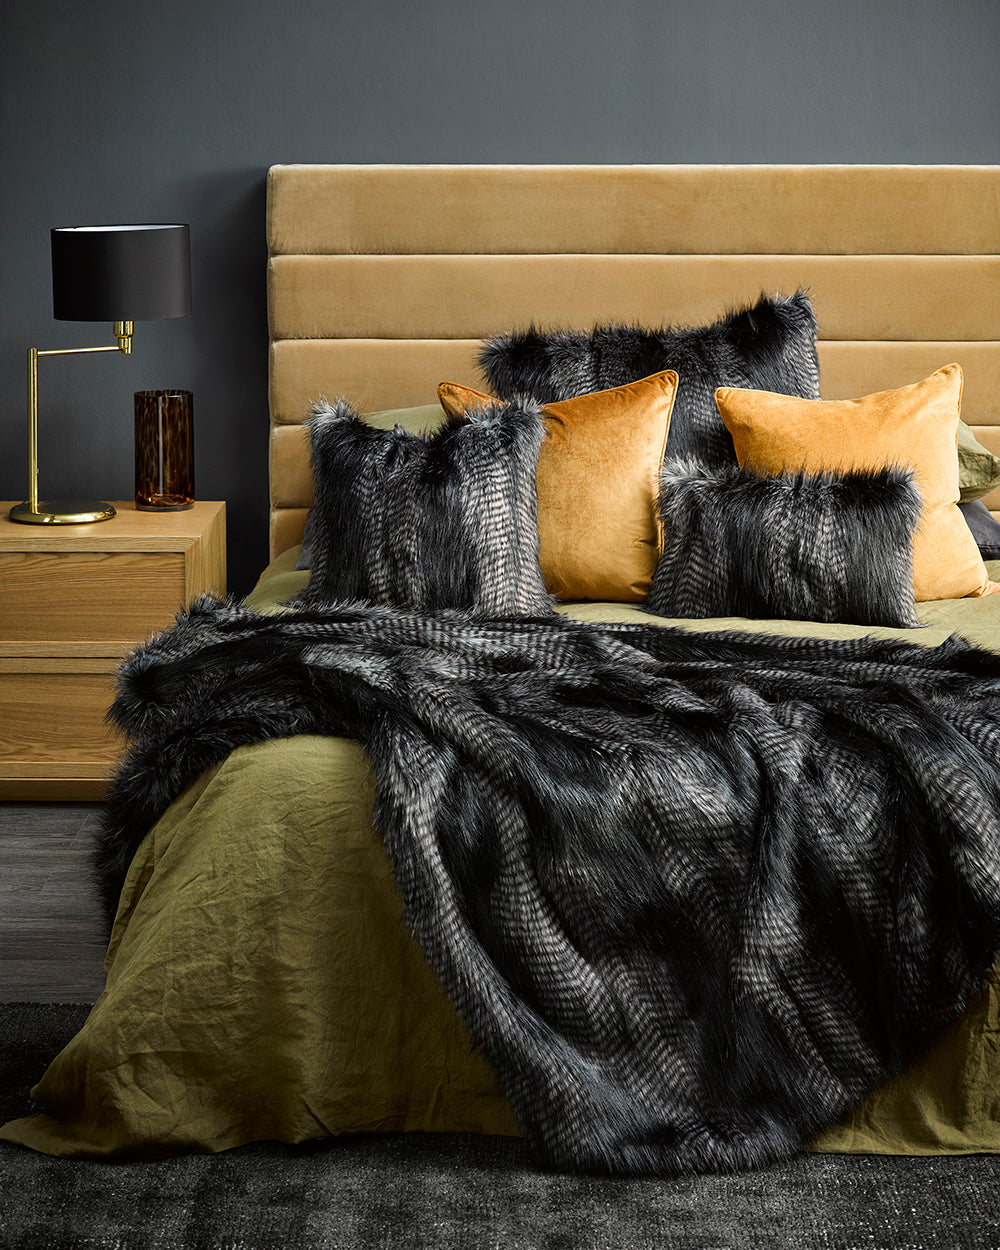 Heirloom Black Coyote Cushions in Faux Fur are available from Make Your House A Home Premium Stockist. Furniture Store Bendigo, Victoria. Australia Wide Delivery. Furtex Baya.